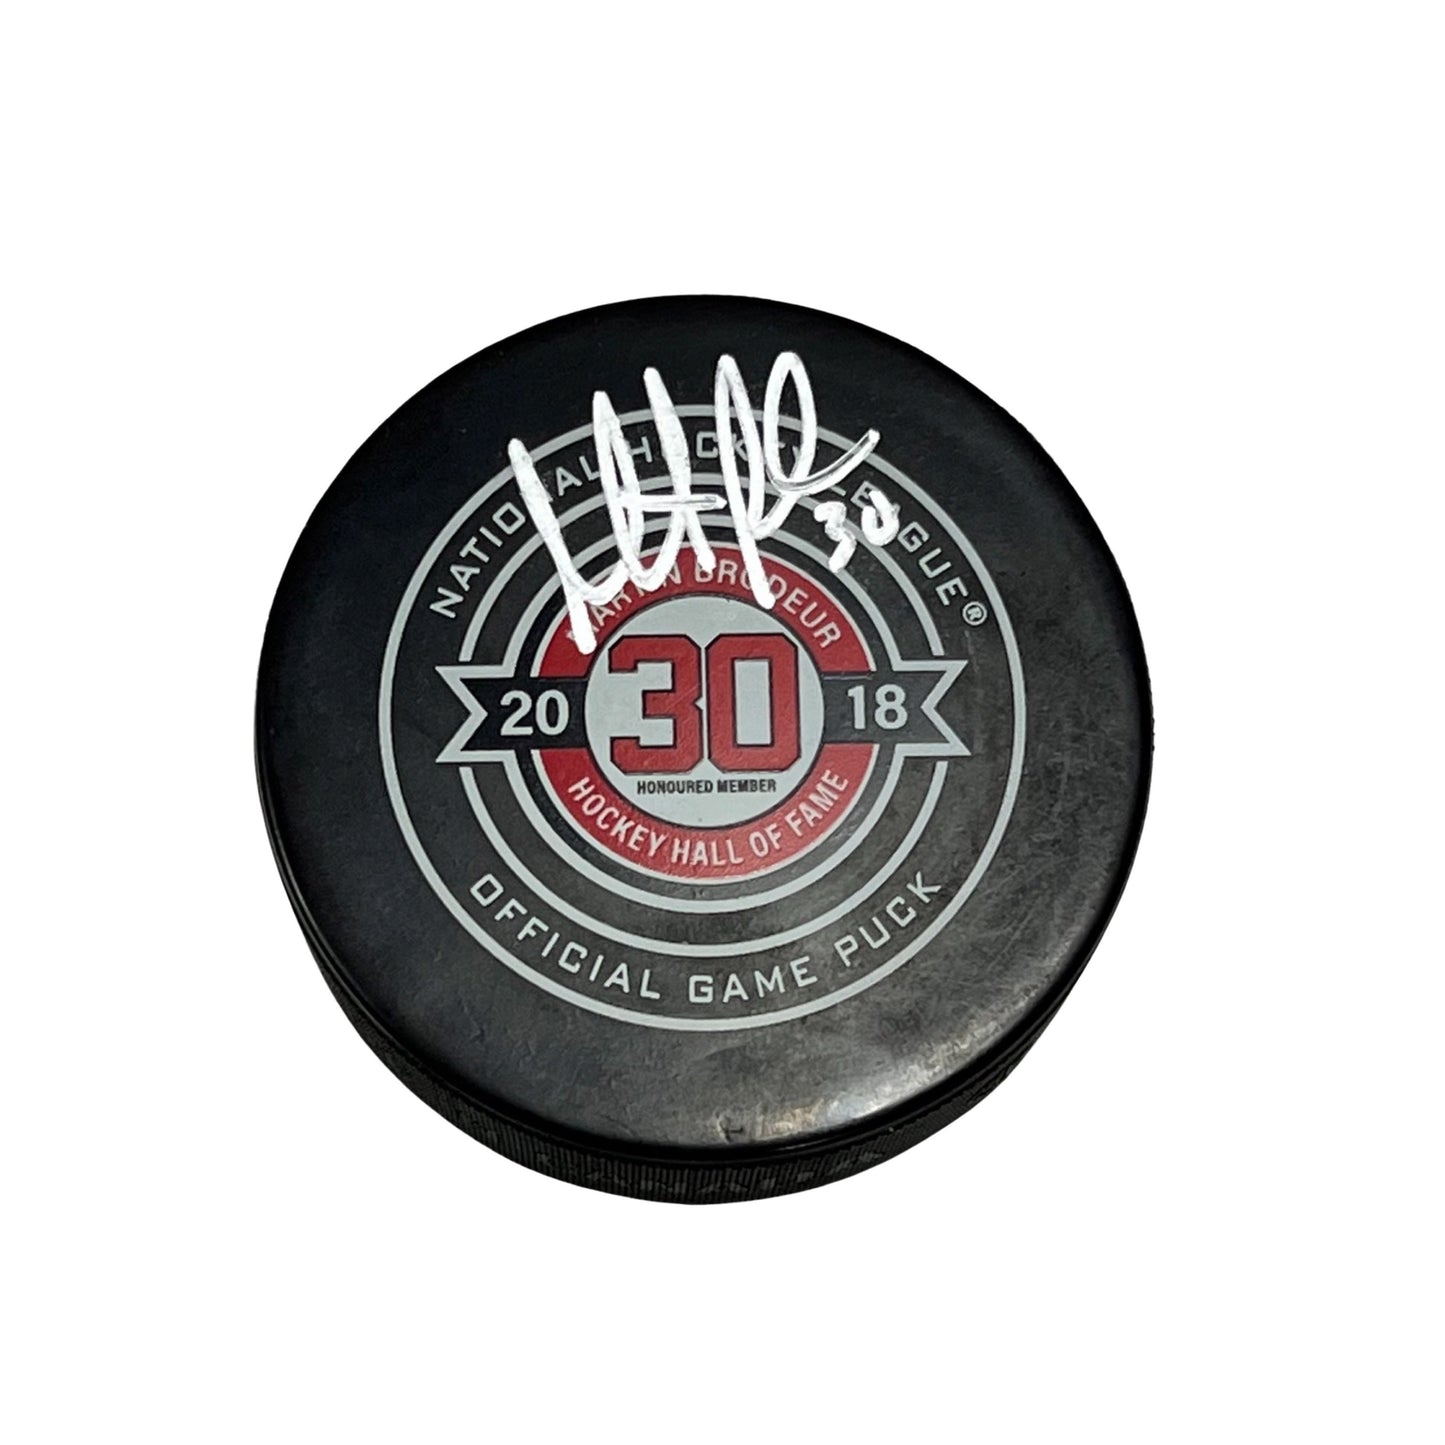 Martin Brodeur Autographed New Jersey Devils Brodeur Hall of Fame Logo Hockey Puck Fanatics